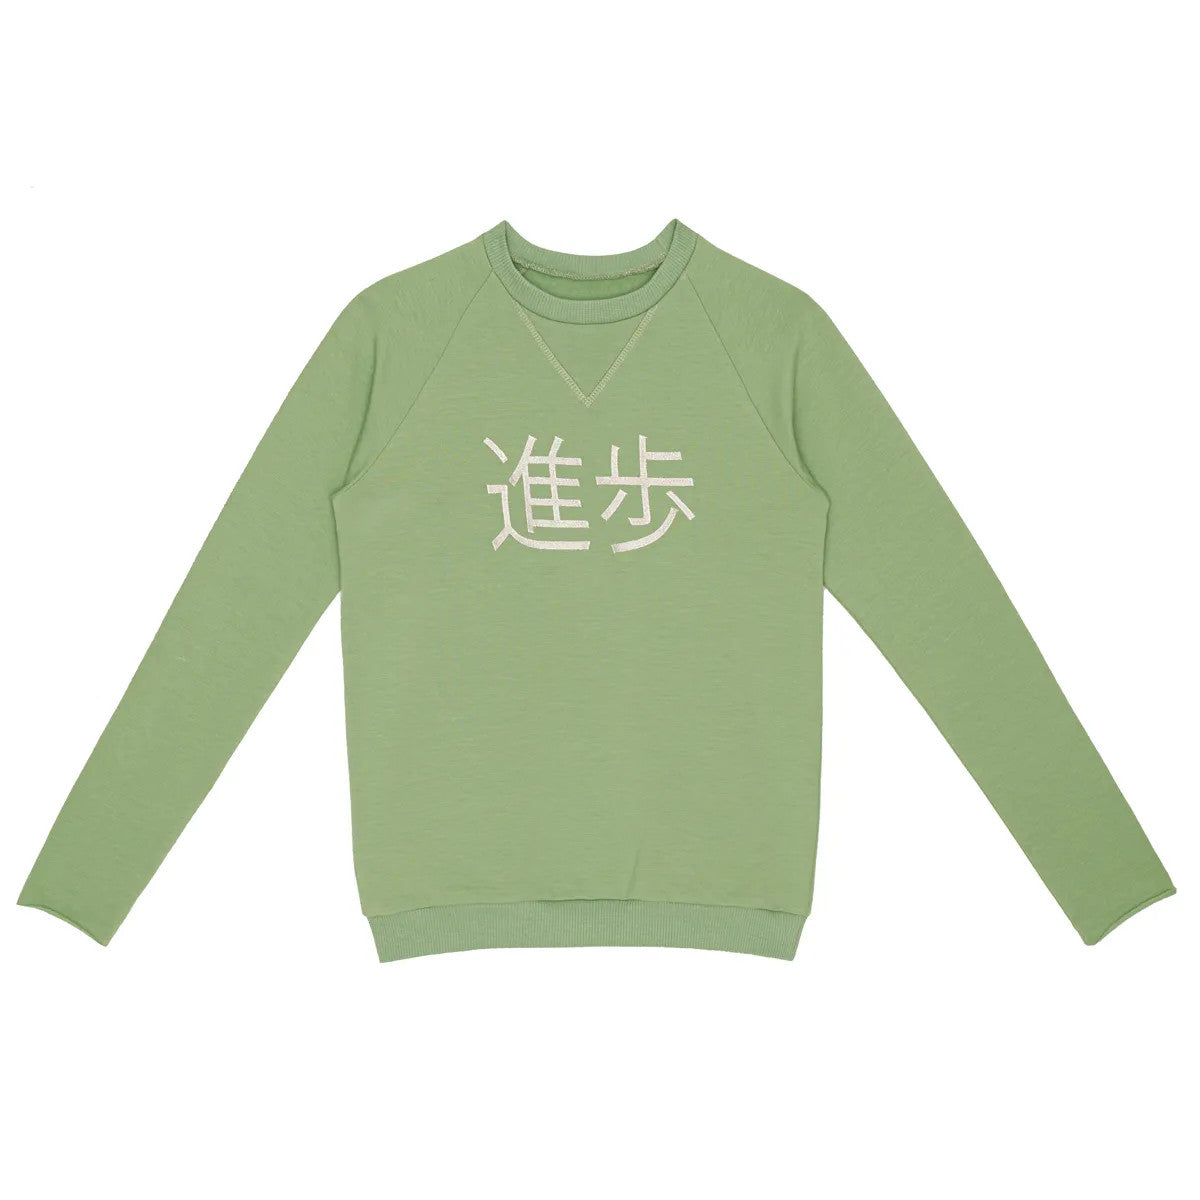 Little Hedonist Jade minimalistic sweater made of the softest organic babysweat you can imagine, with a soft 3D print noting Progress in Japanese.